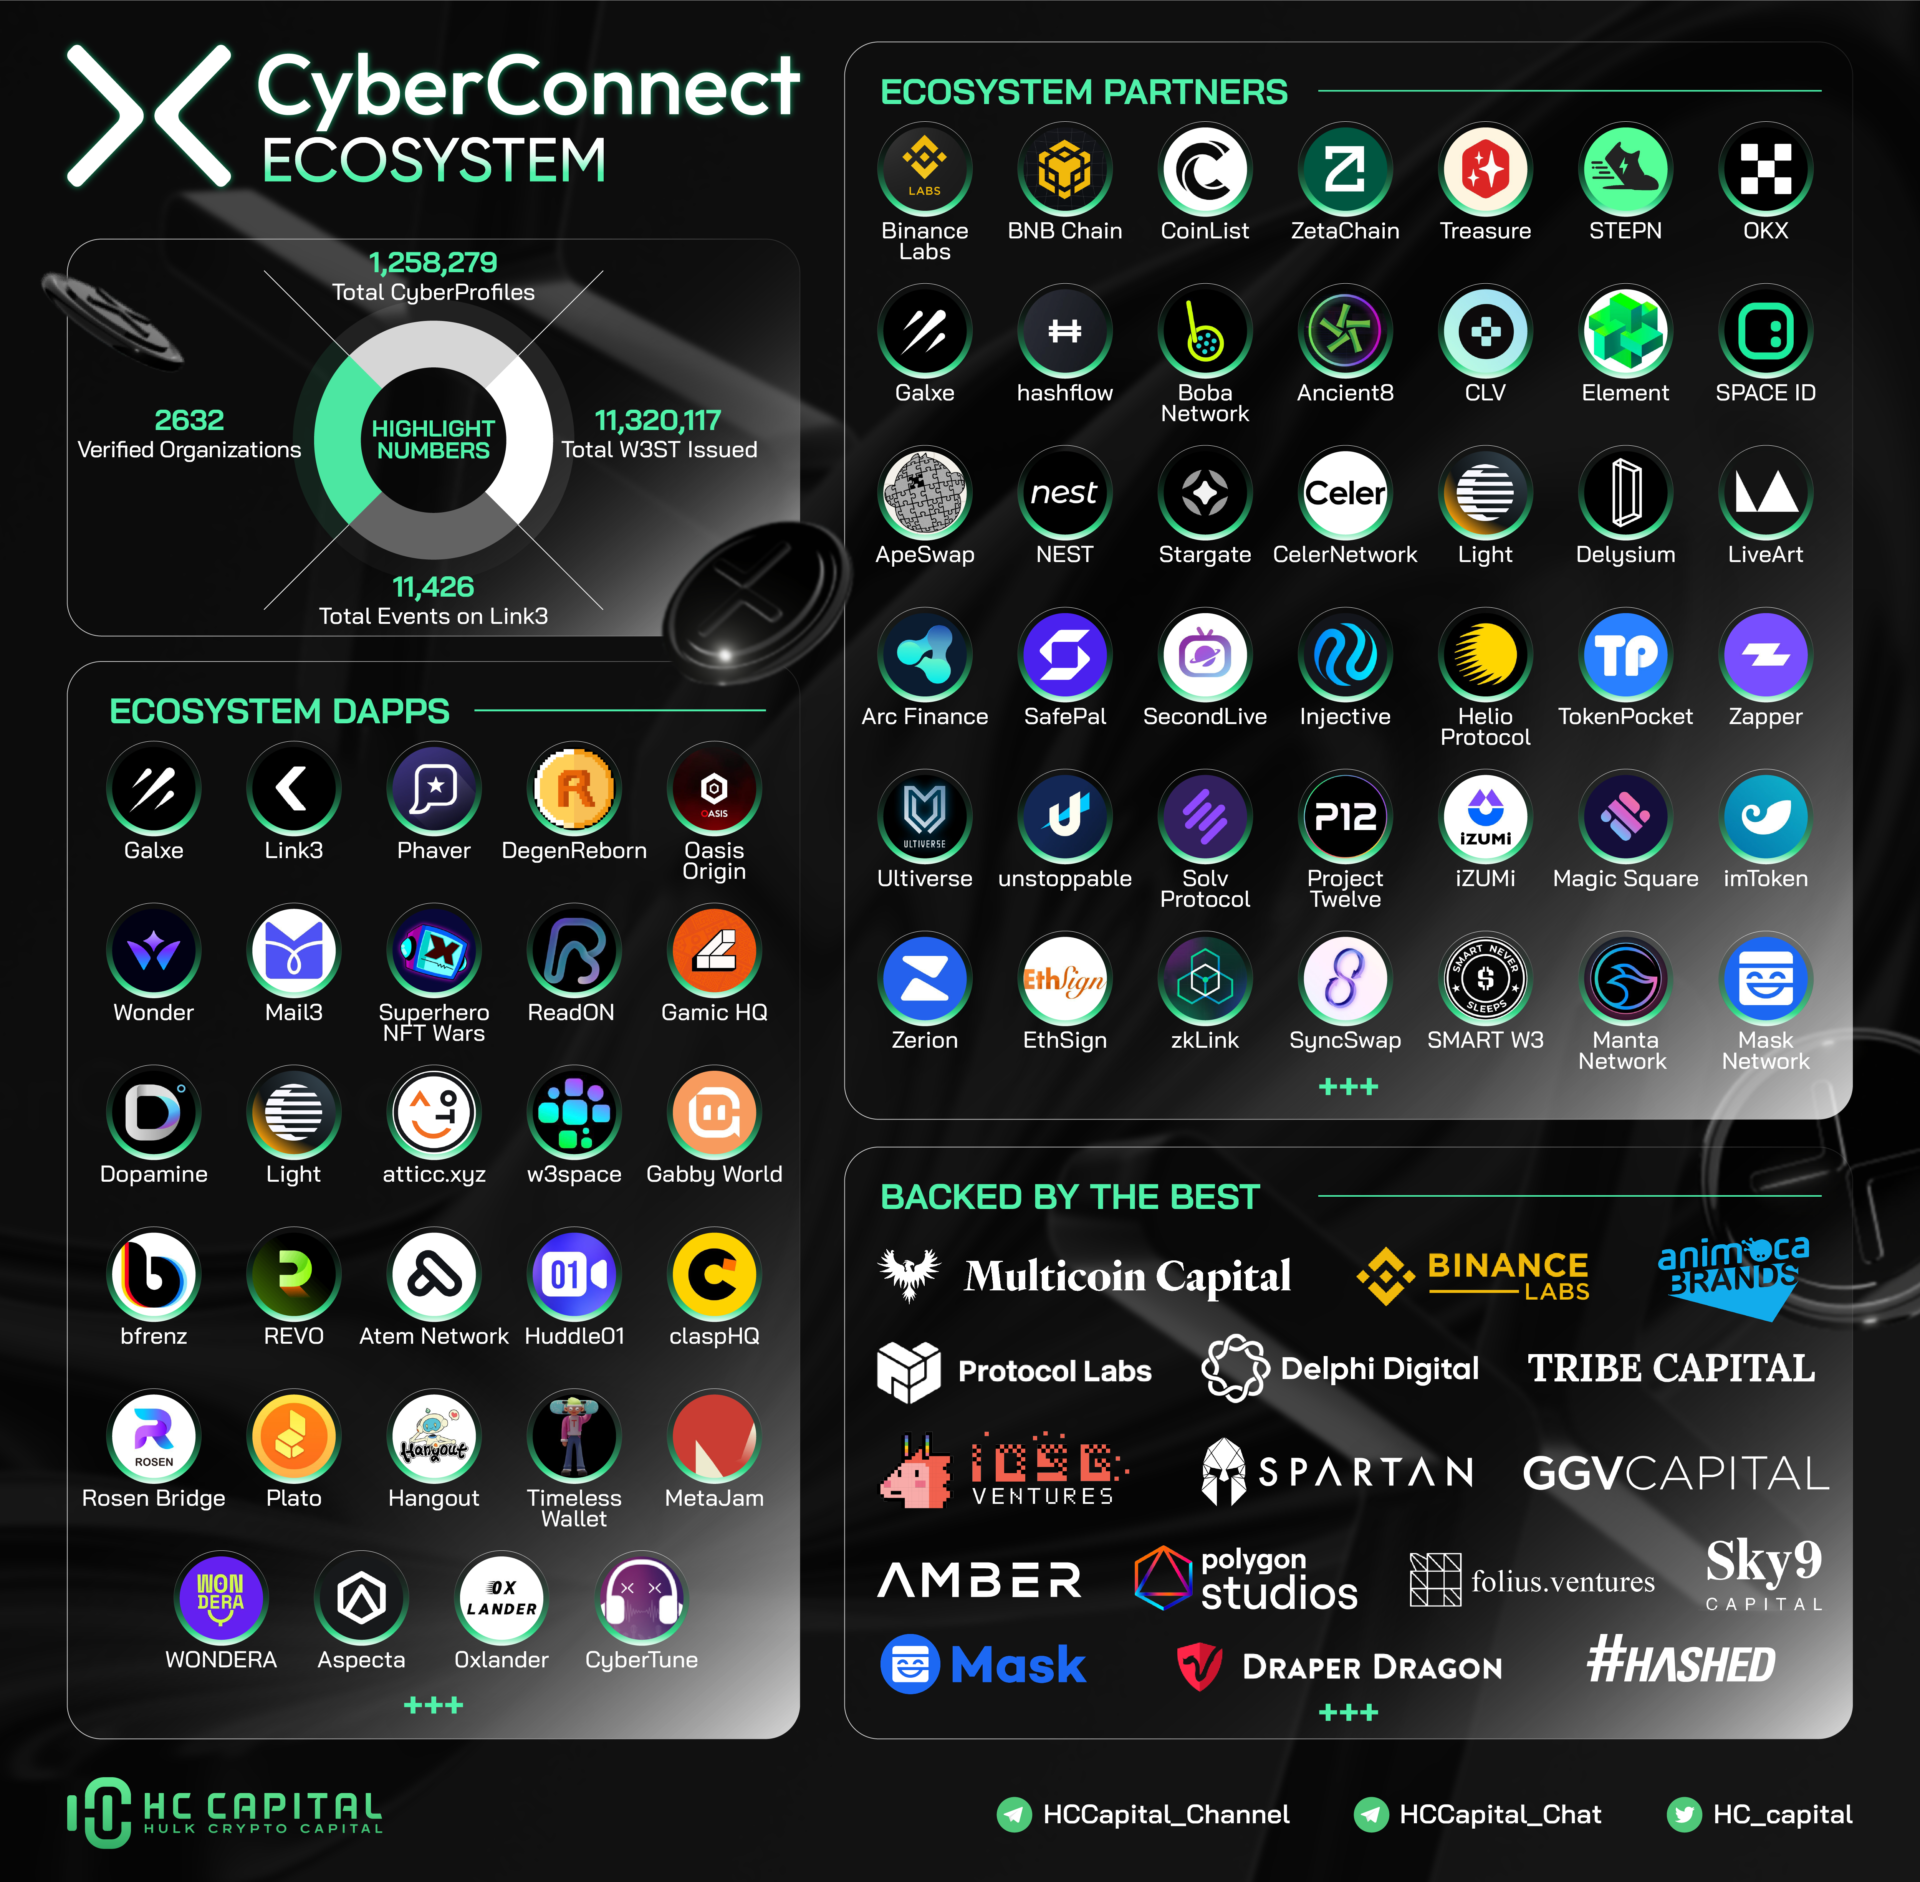 CyberConnect Ecosystem